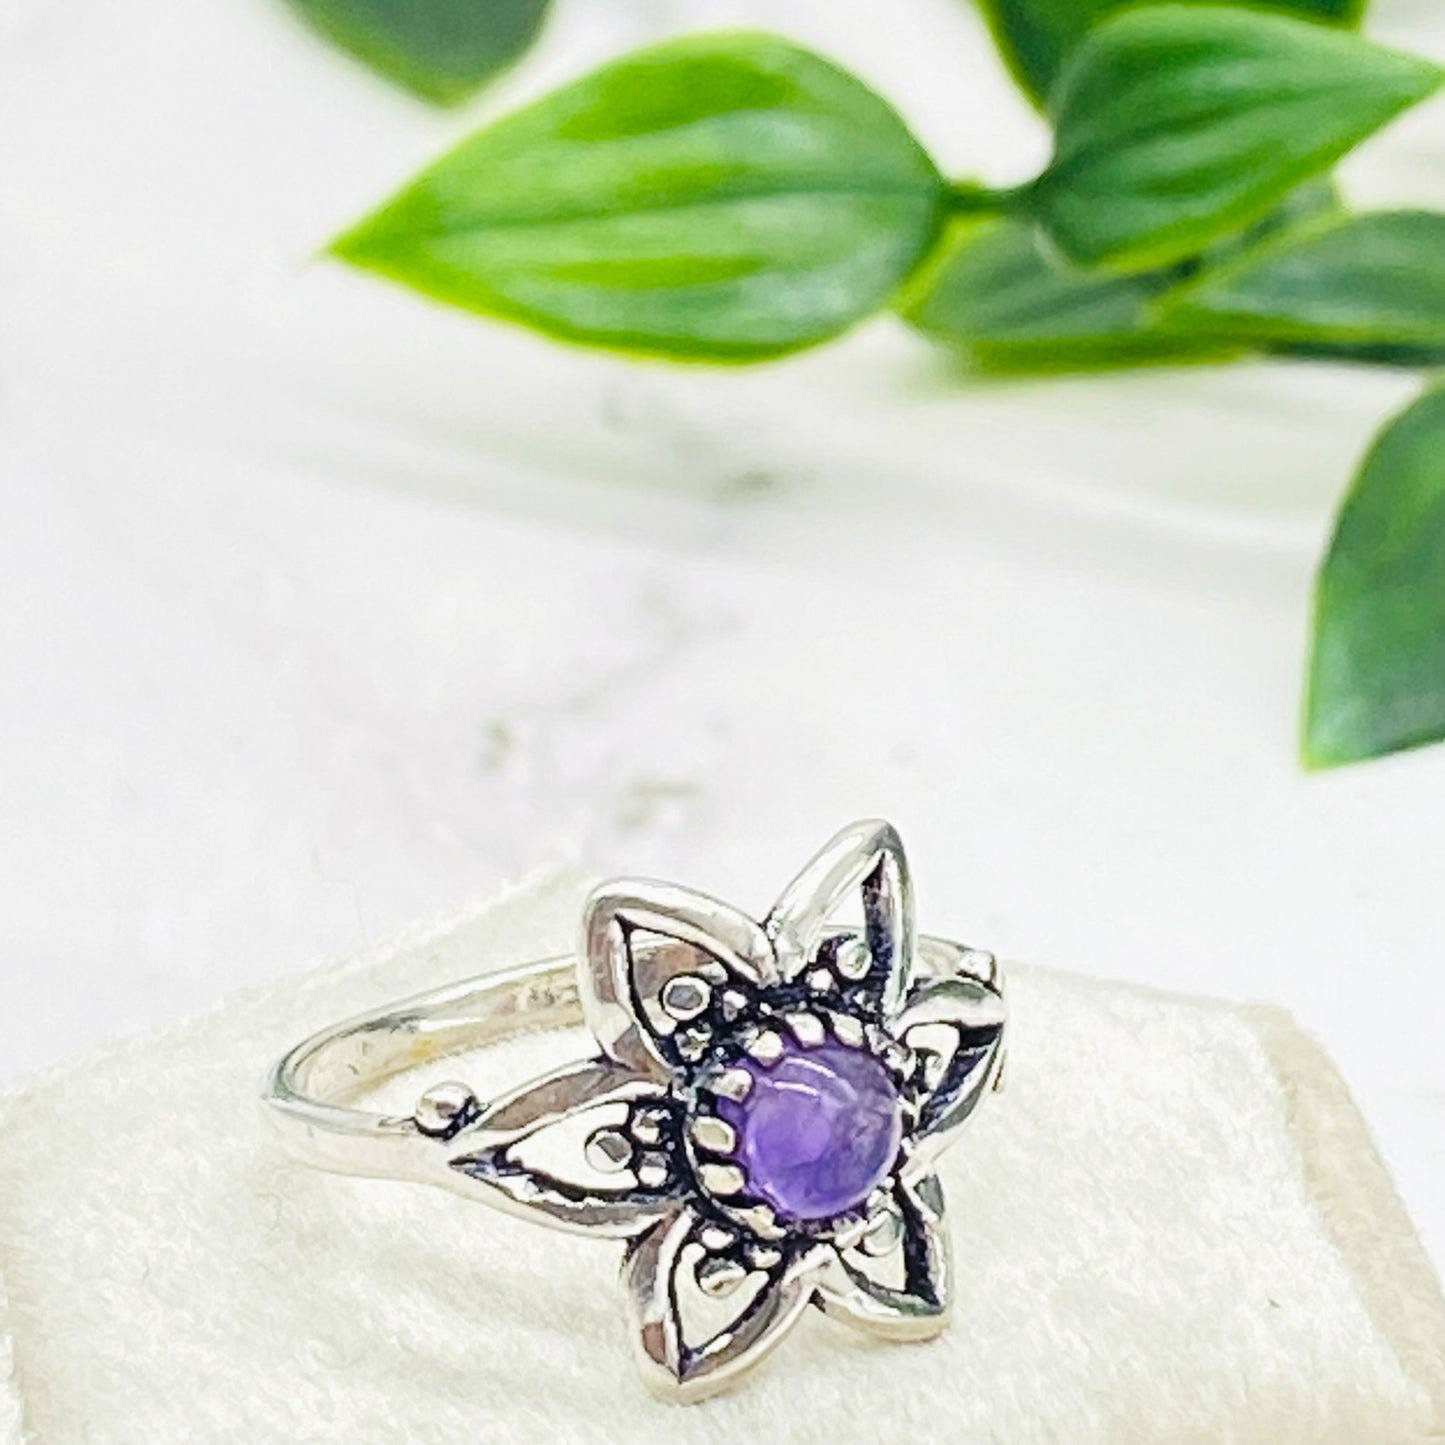 Flower Design Sterling Silver Ring, Crystal Silver Ring, Handmade Ring, Gift for Her, Gift for Mom, Statement Ring